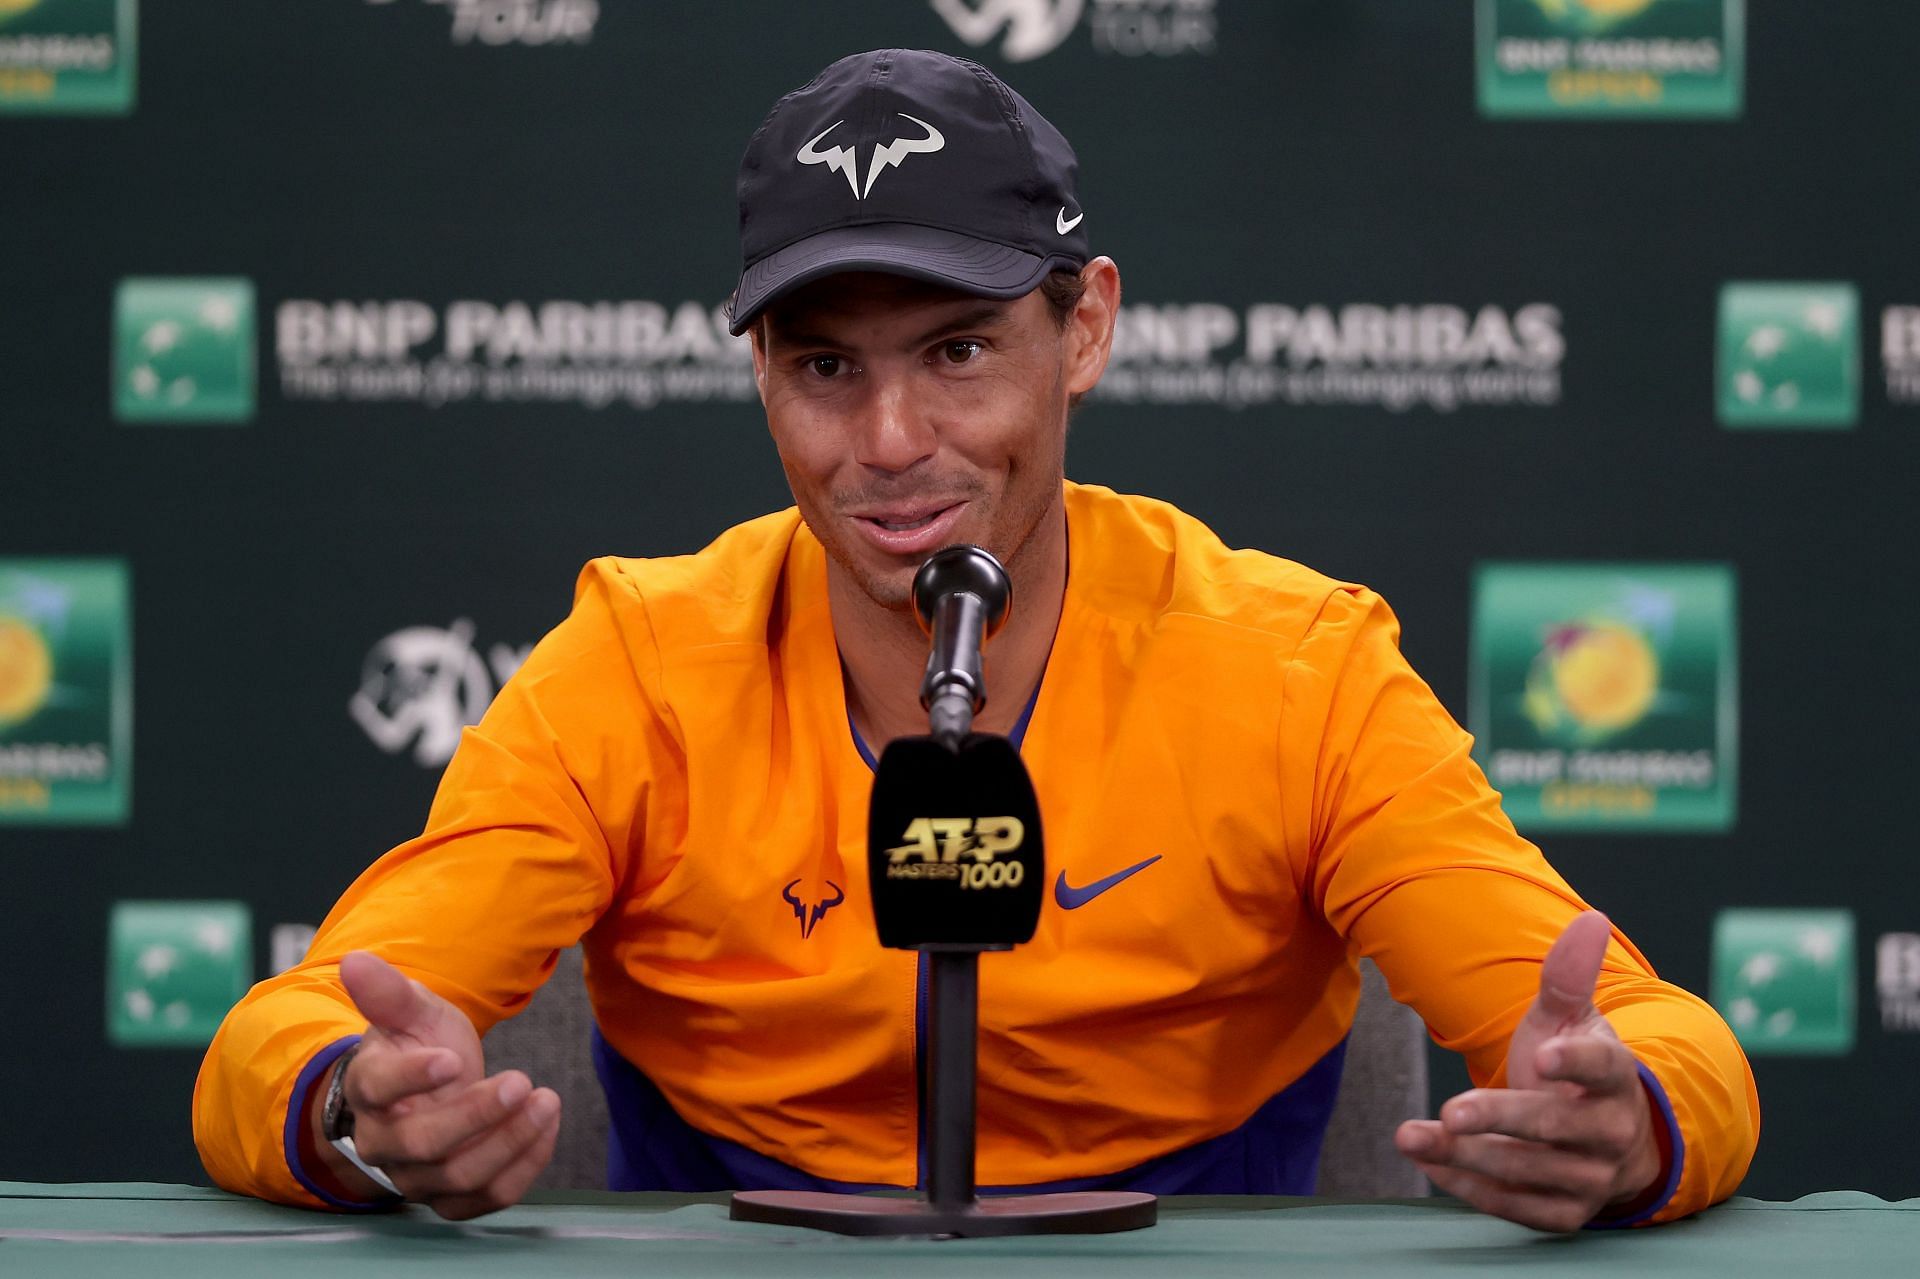 Rafael Nadal at a press conference ahead of the start of the 2022 Indian Wells Masters